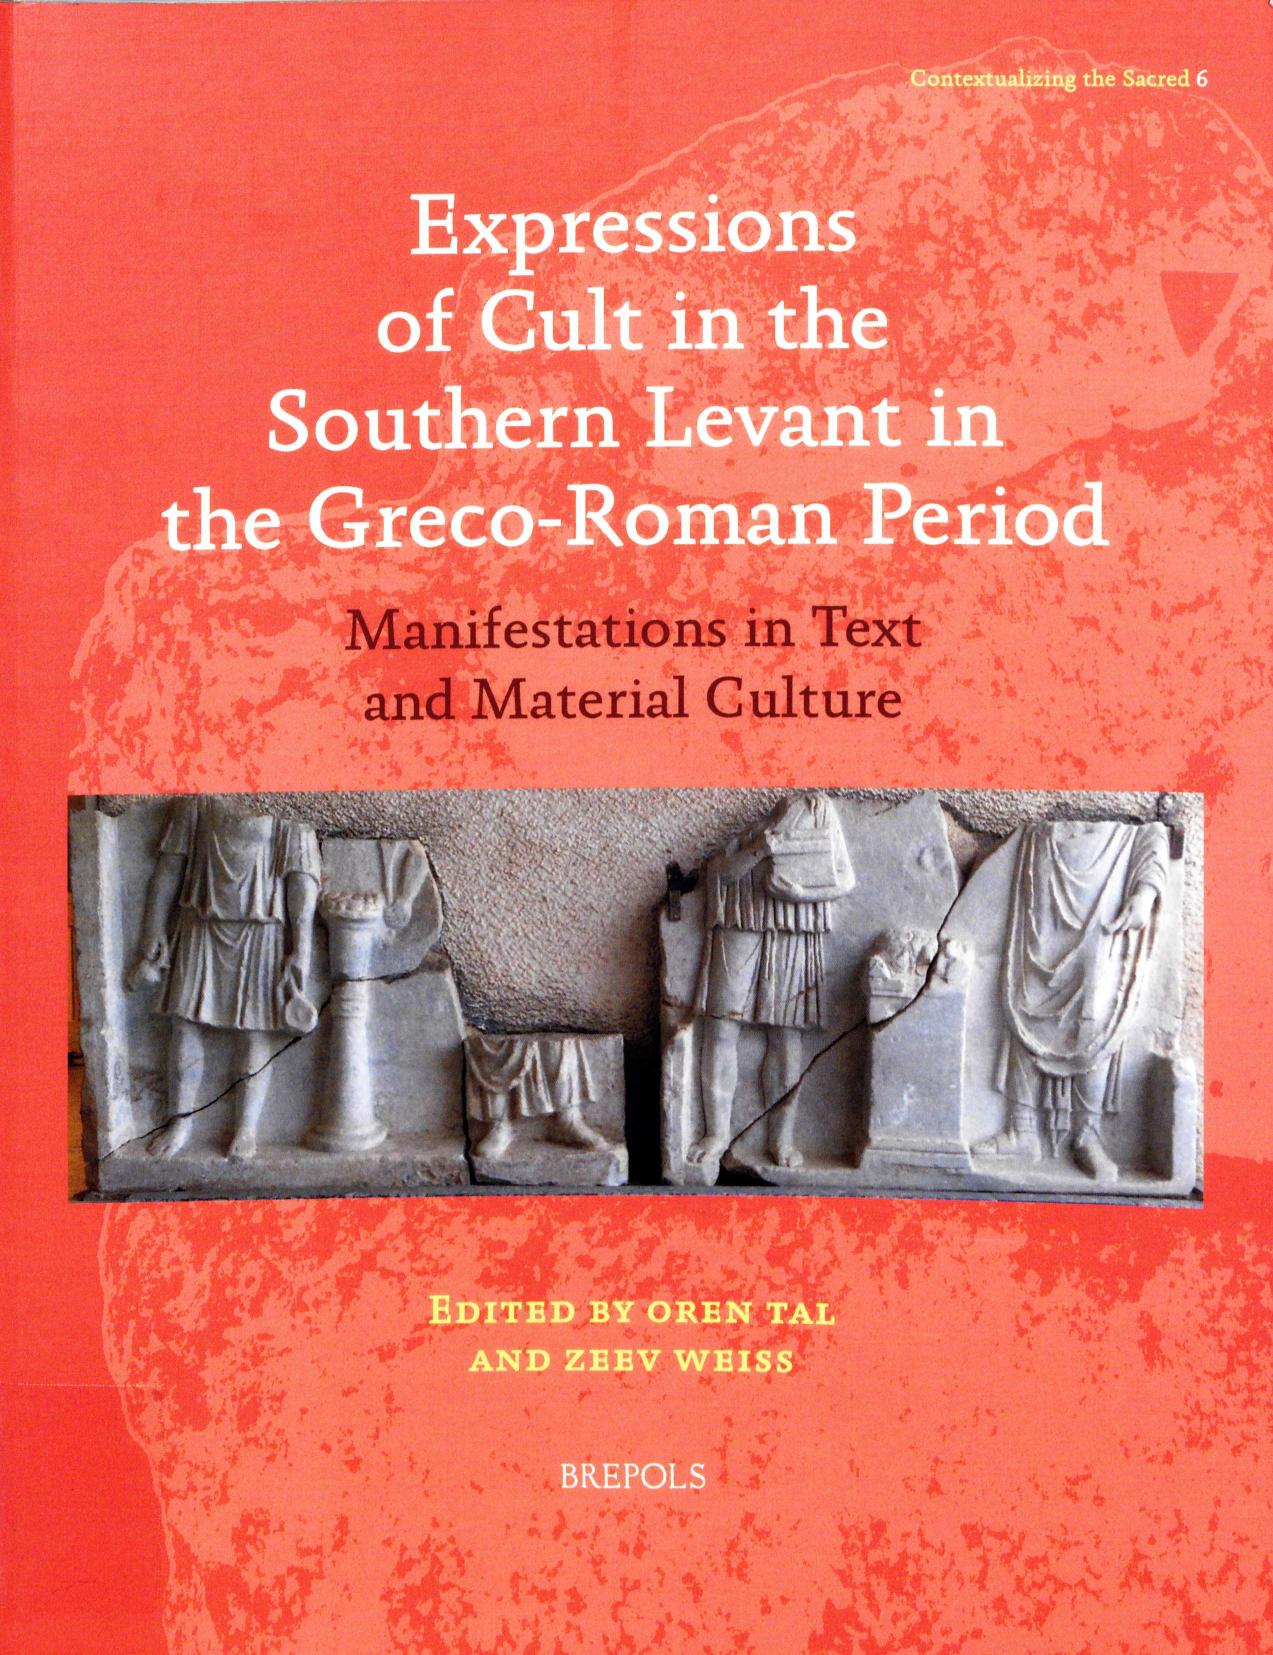 Expressions of Cult in the Southern Levant in the Greco-Roman Period: Manifestations in Text and Material Culture by Oren Tal Zeev Weiss